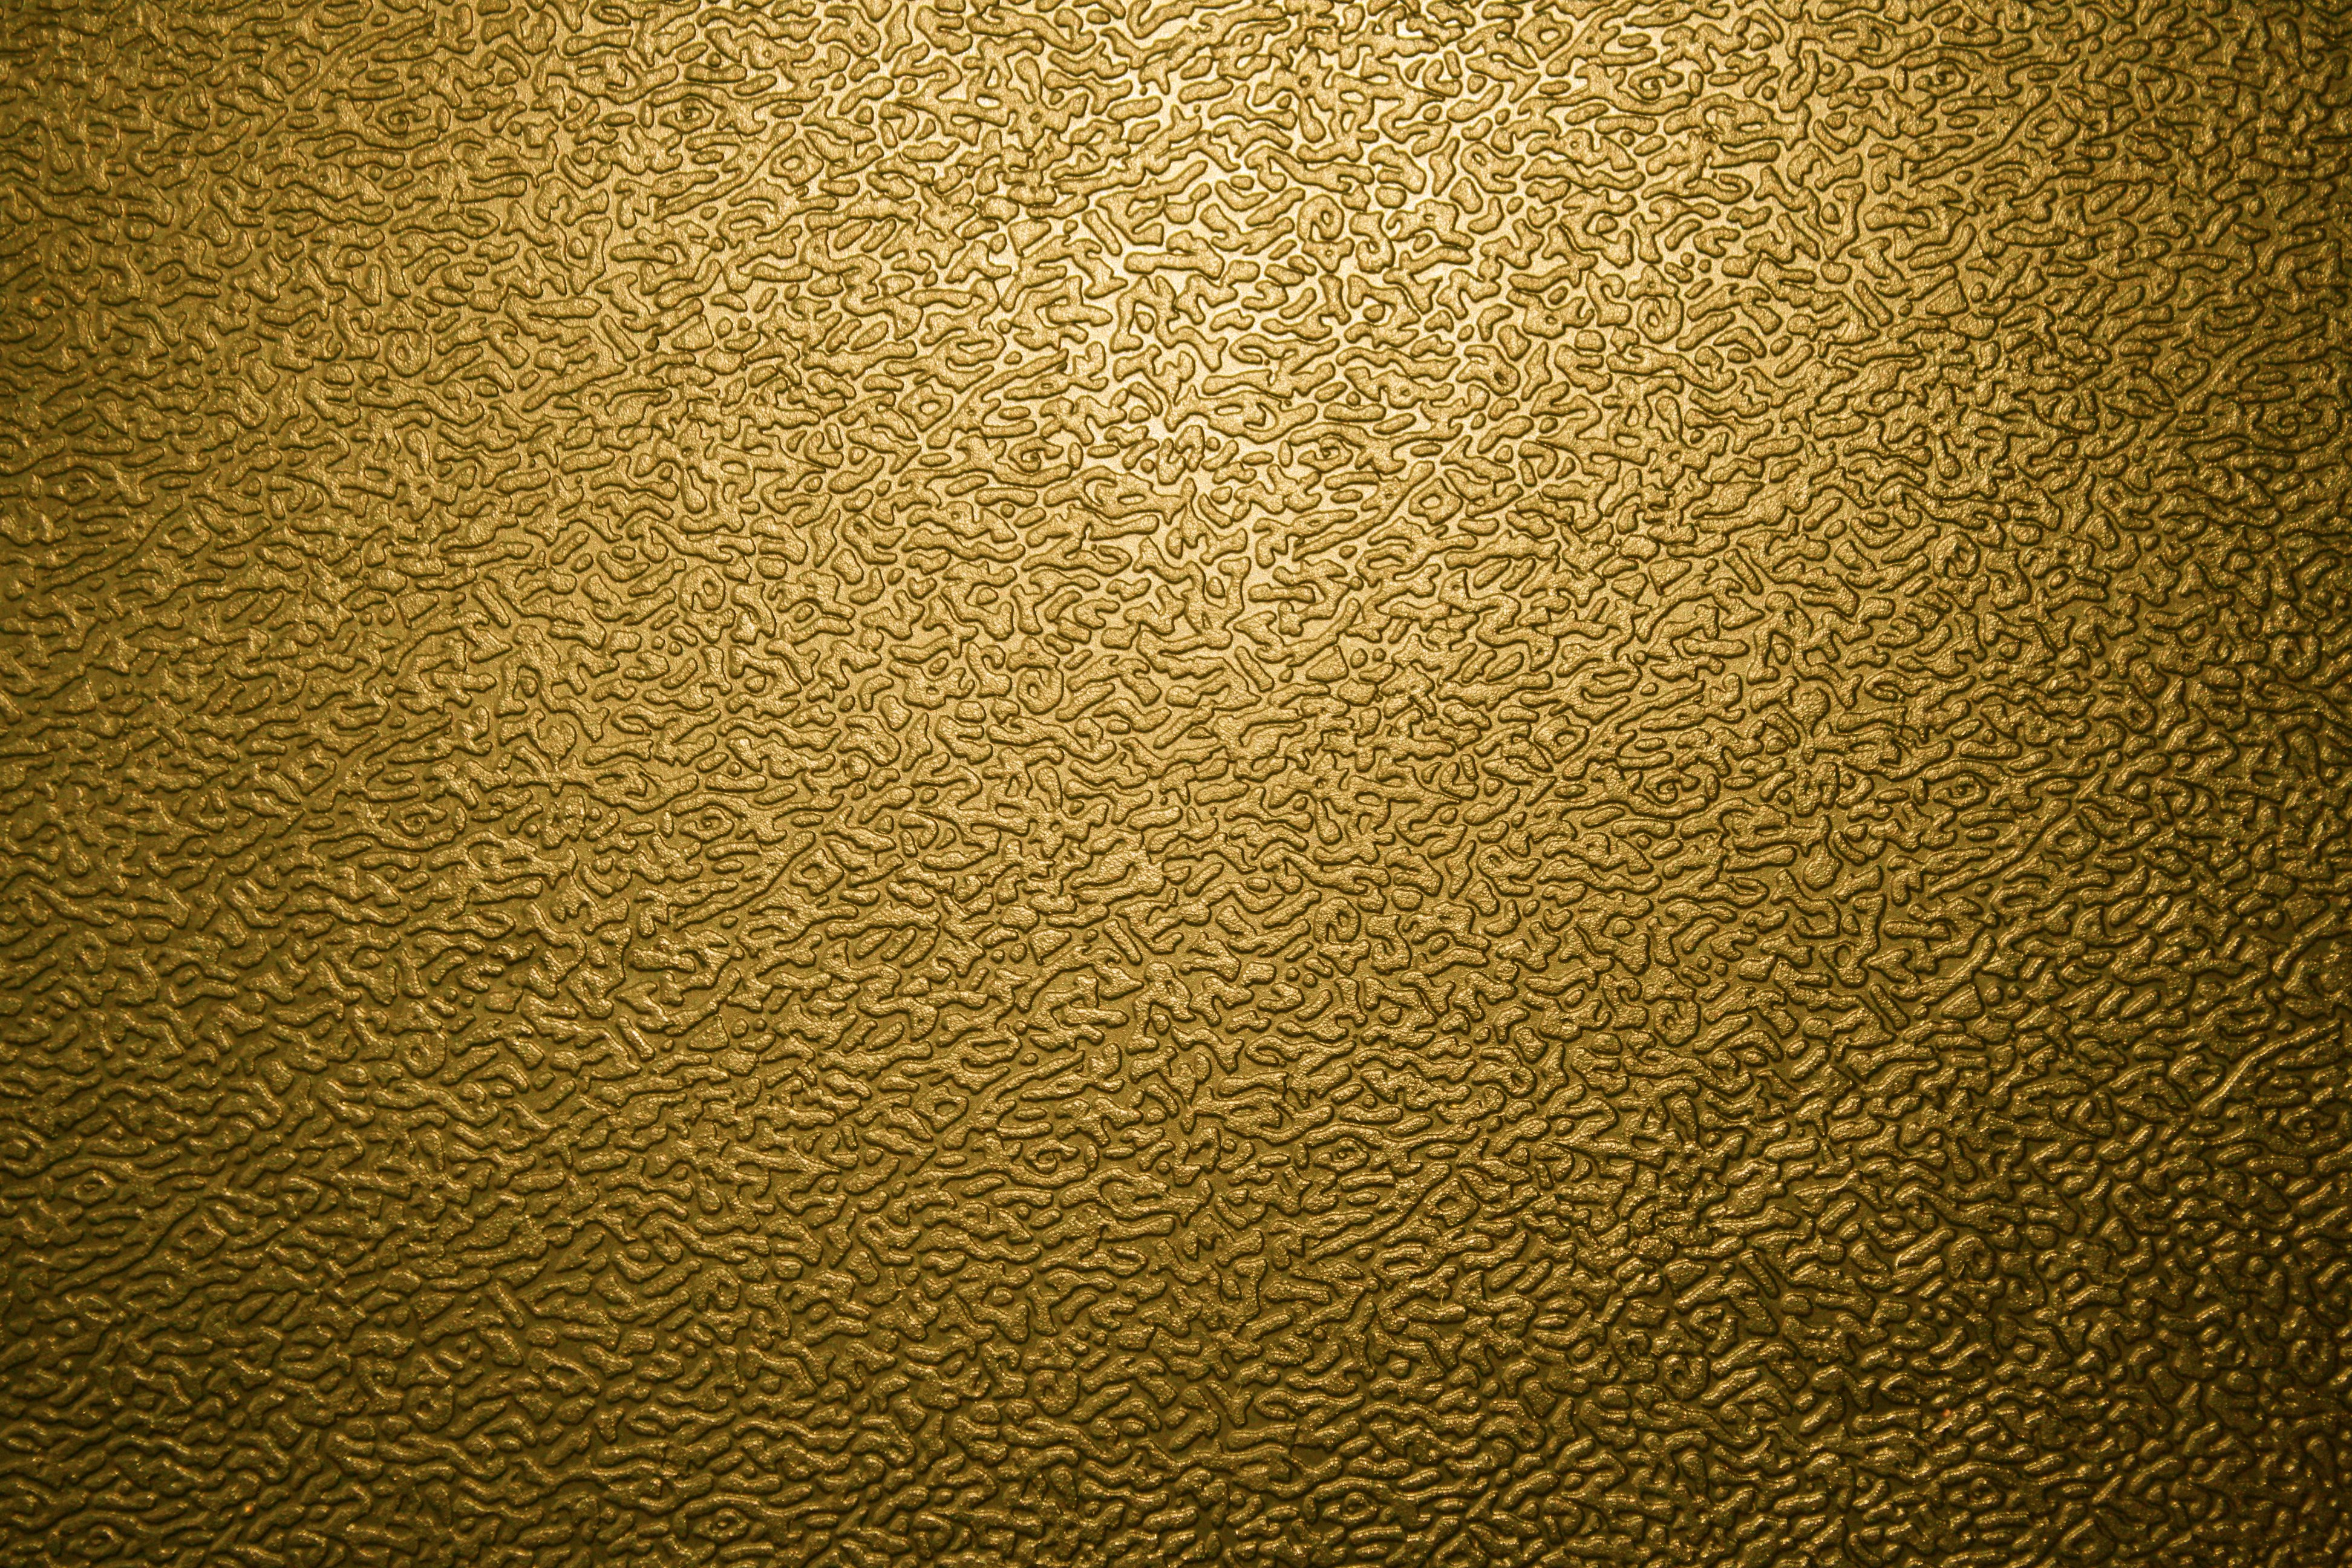 Textured Gold Plastic Close Up Picture | Free Photograph | Photos ...